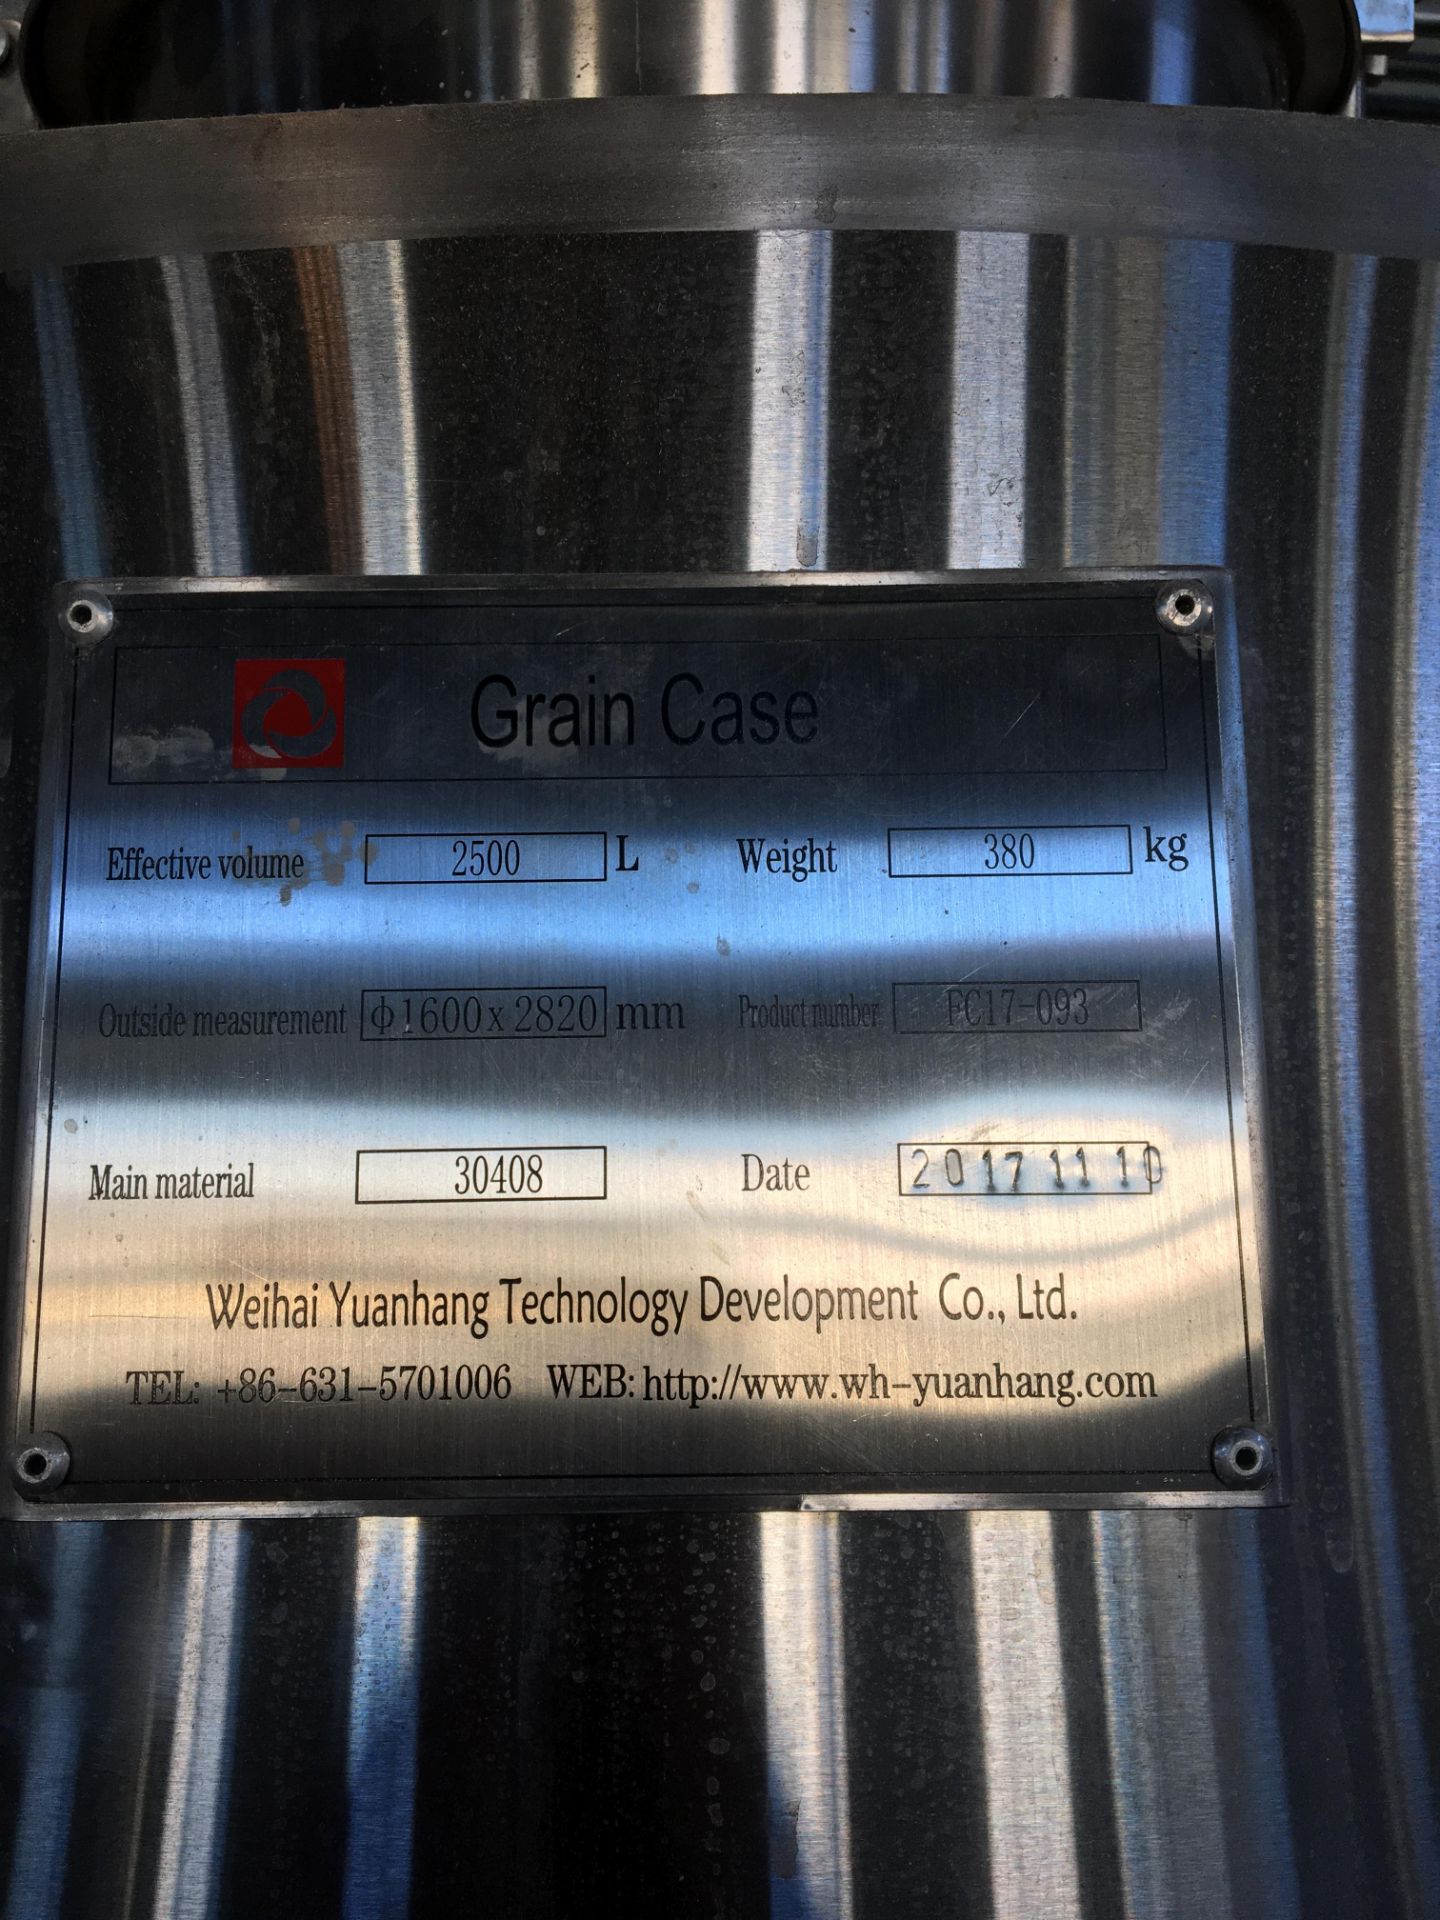 2500-L Minnetonka Grain Case, Stainless Steel; Vessel that holds all your milled grain prior to - Image 6 of 8